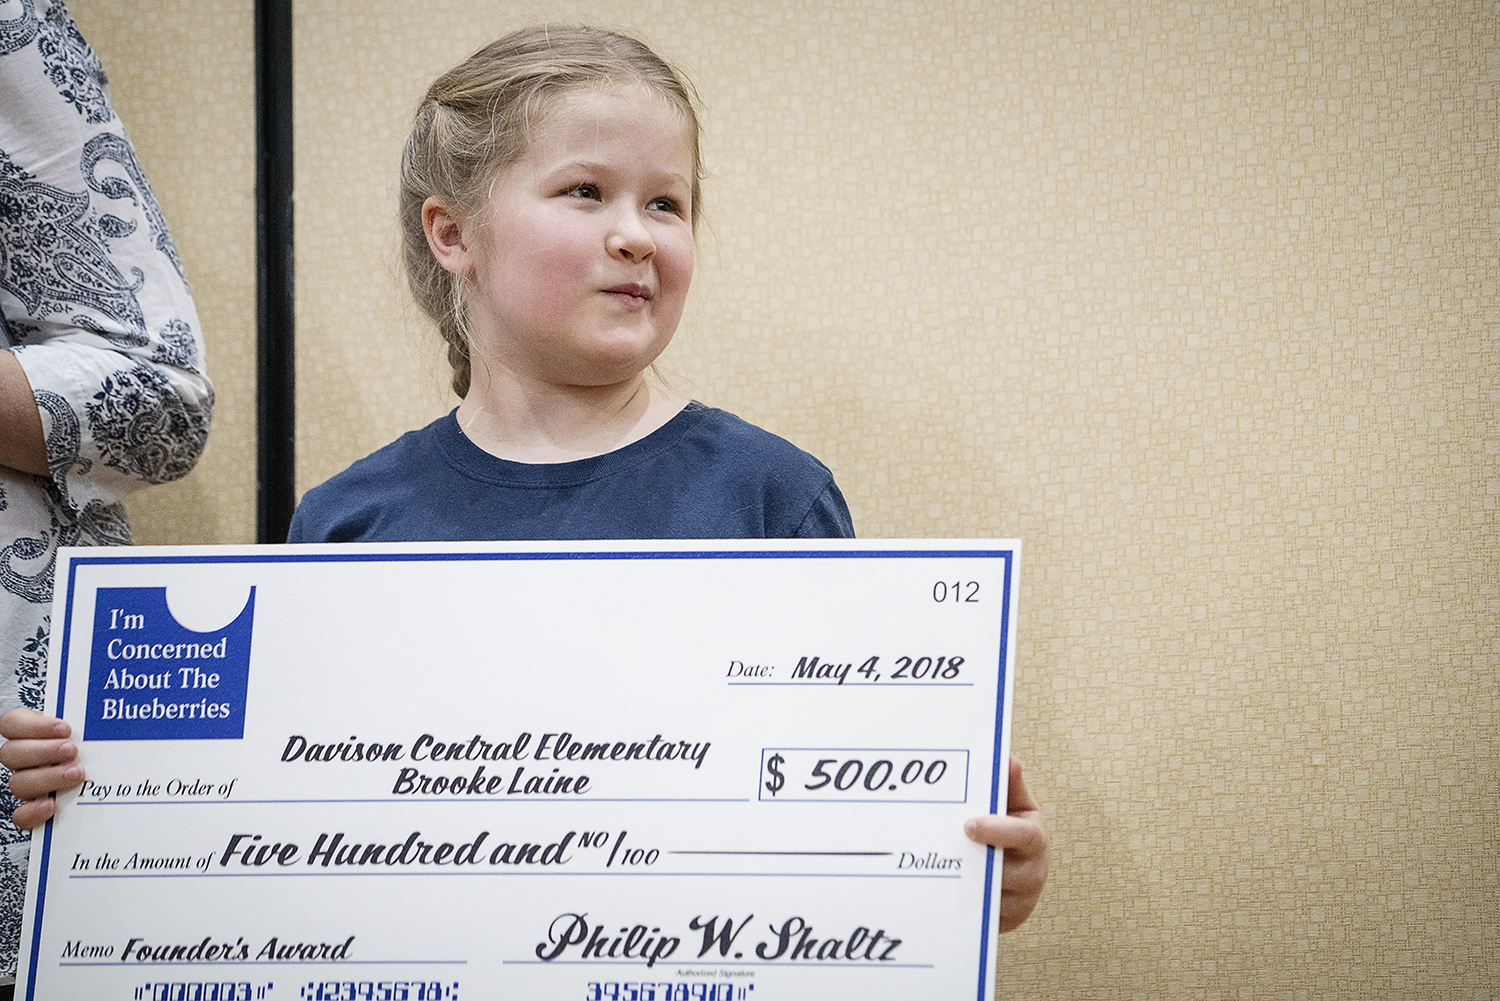 Flint, MI - Friday, May 4, 2018: Davison Central Elementary  student Brooke Laine holds a large check on stage after being presented with the Blueberry Ambassador Founder's Award during the 5th Annual Blueberry Ambassador Awards Party at the Riverfro